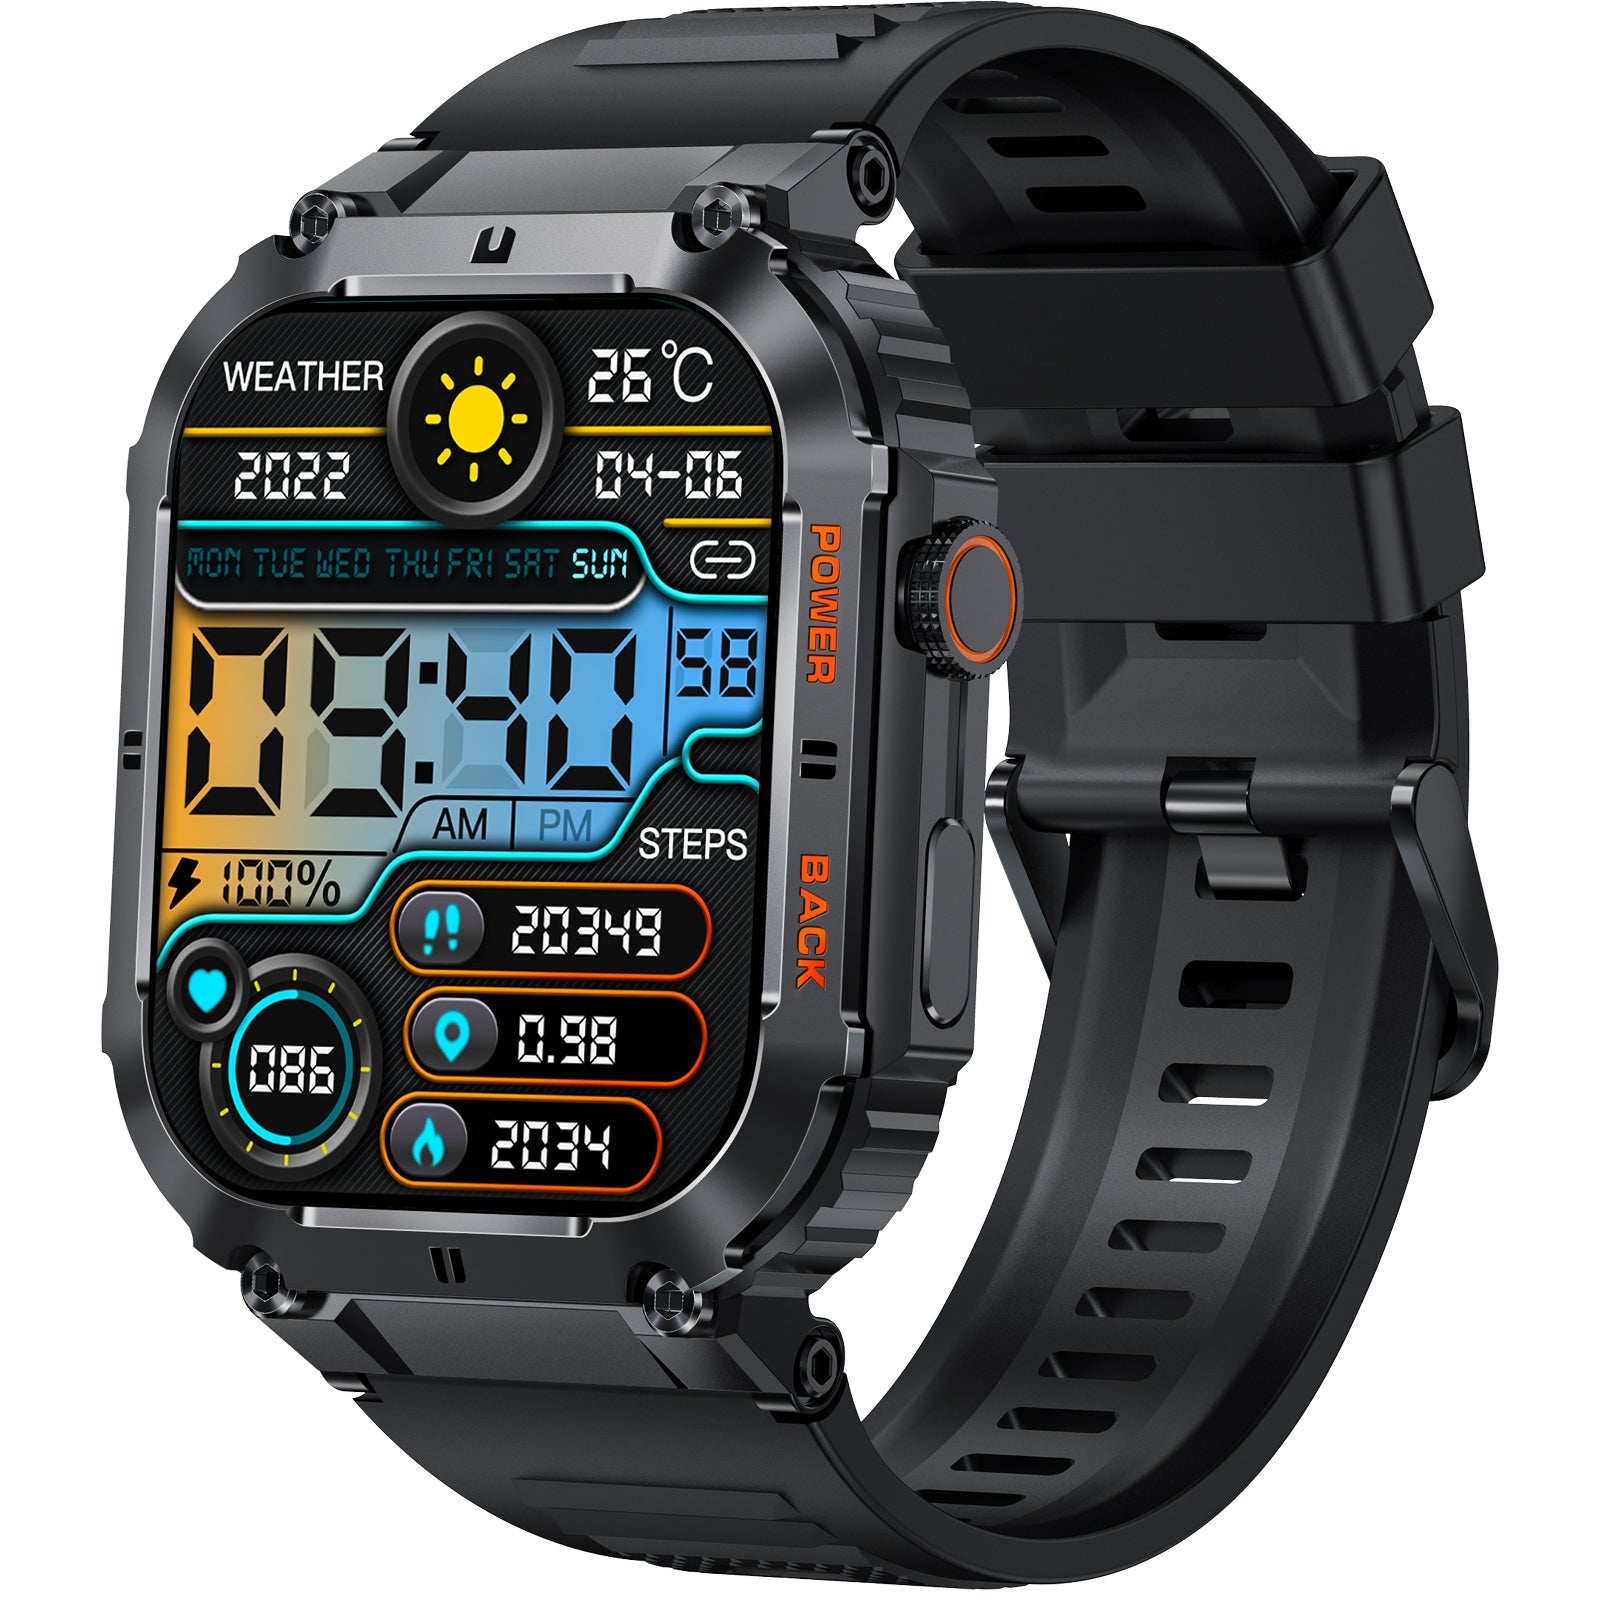  Amazfit GTS 2 Smart Watch for Men Android iPhone